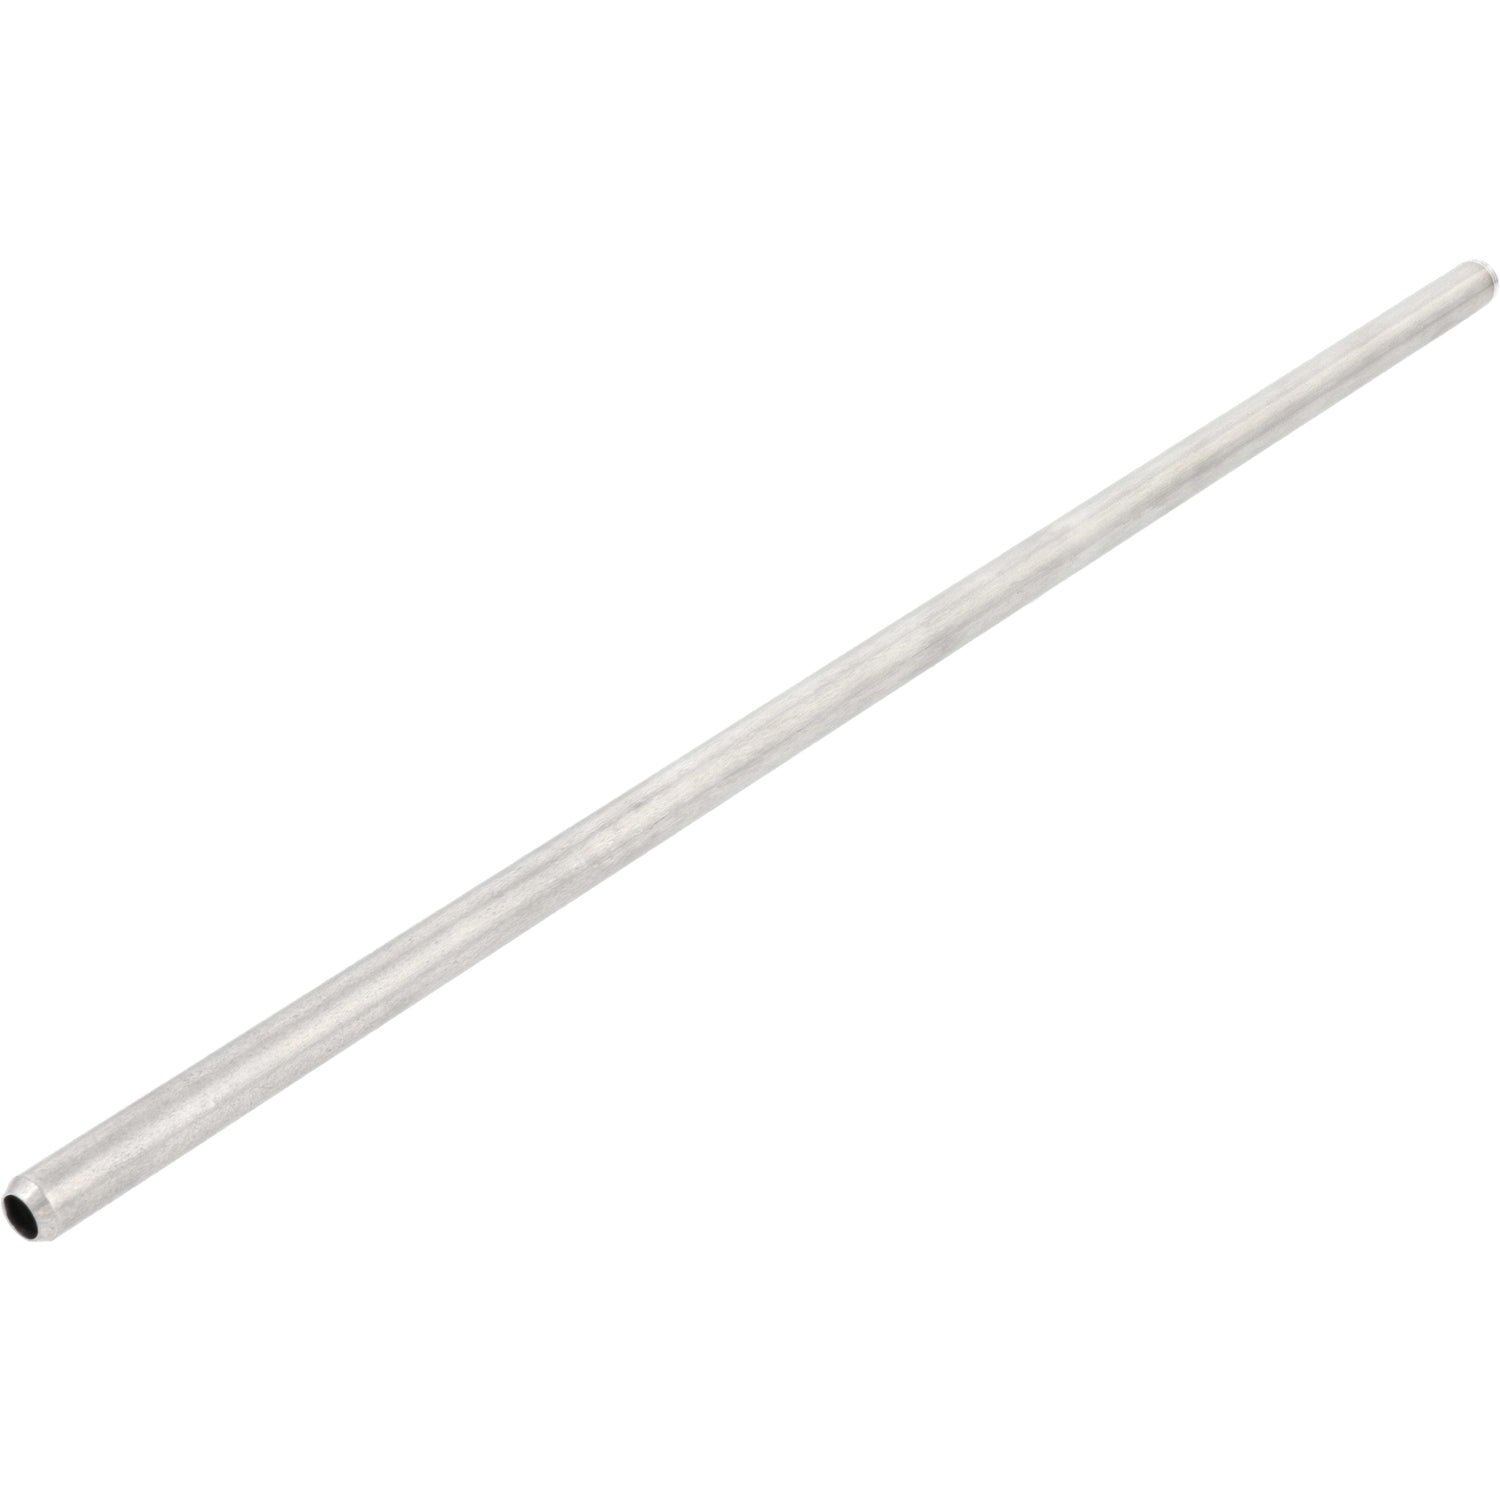 3/8 inch stainless steel tube on a white background.